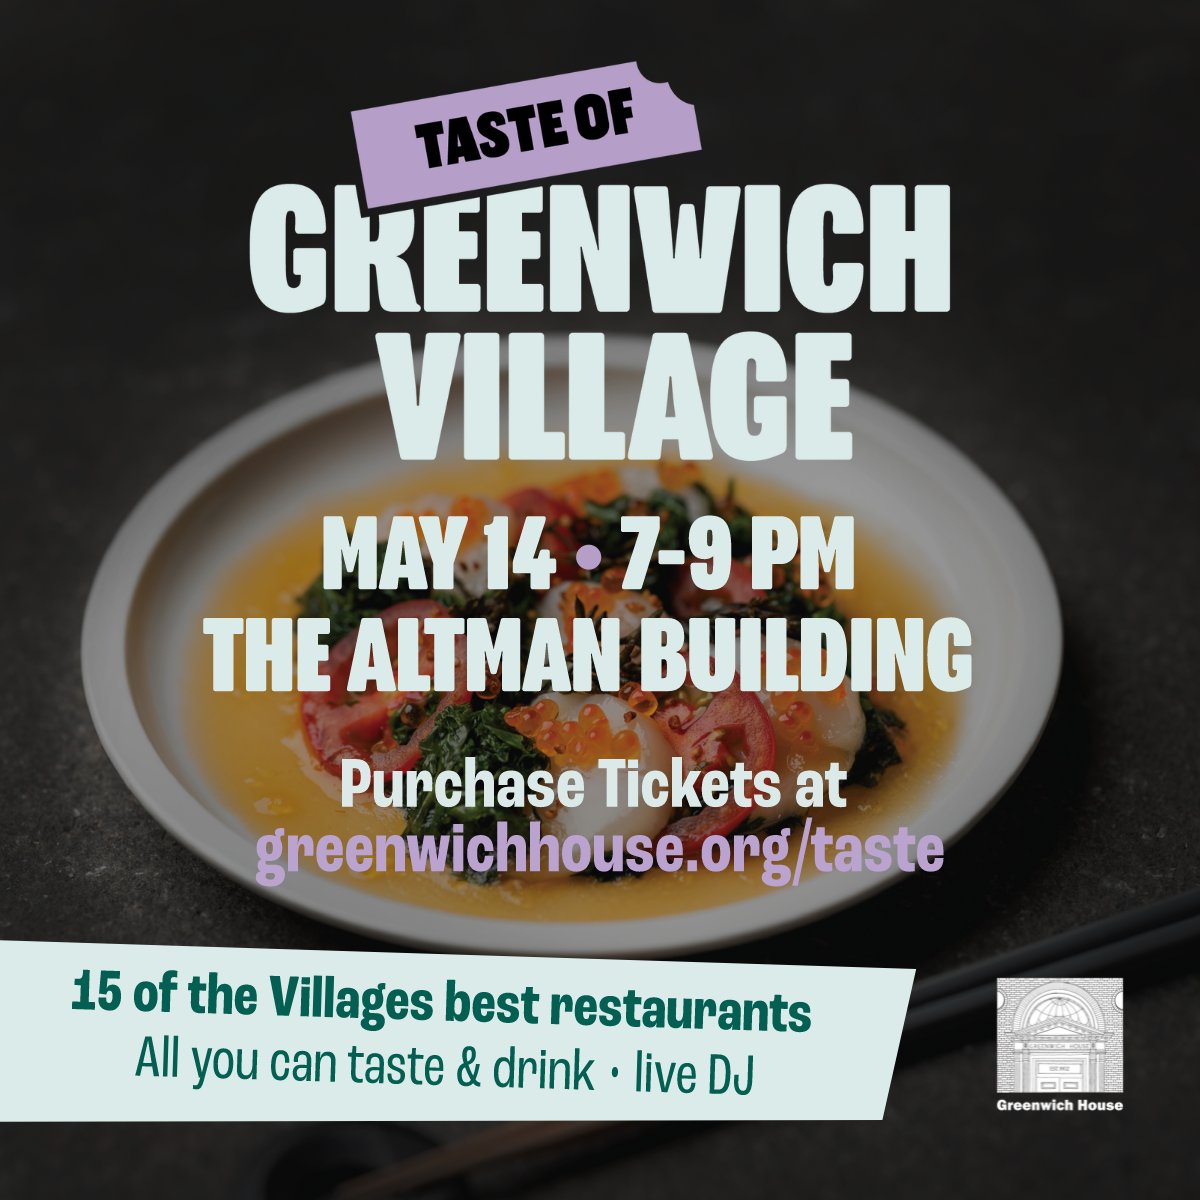 Taste of Greenwich Village is back for the 22nd year featuring mouthwatering dishes from celebrated chefs from across New York City on 5/14 at the Altman Building! Enter to win a pair of tickets! t.dostuffmedia.com/t/c/s/144514